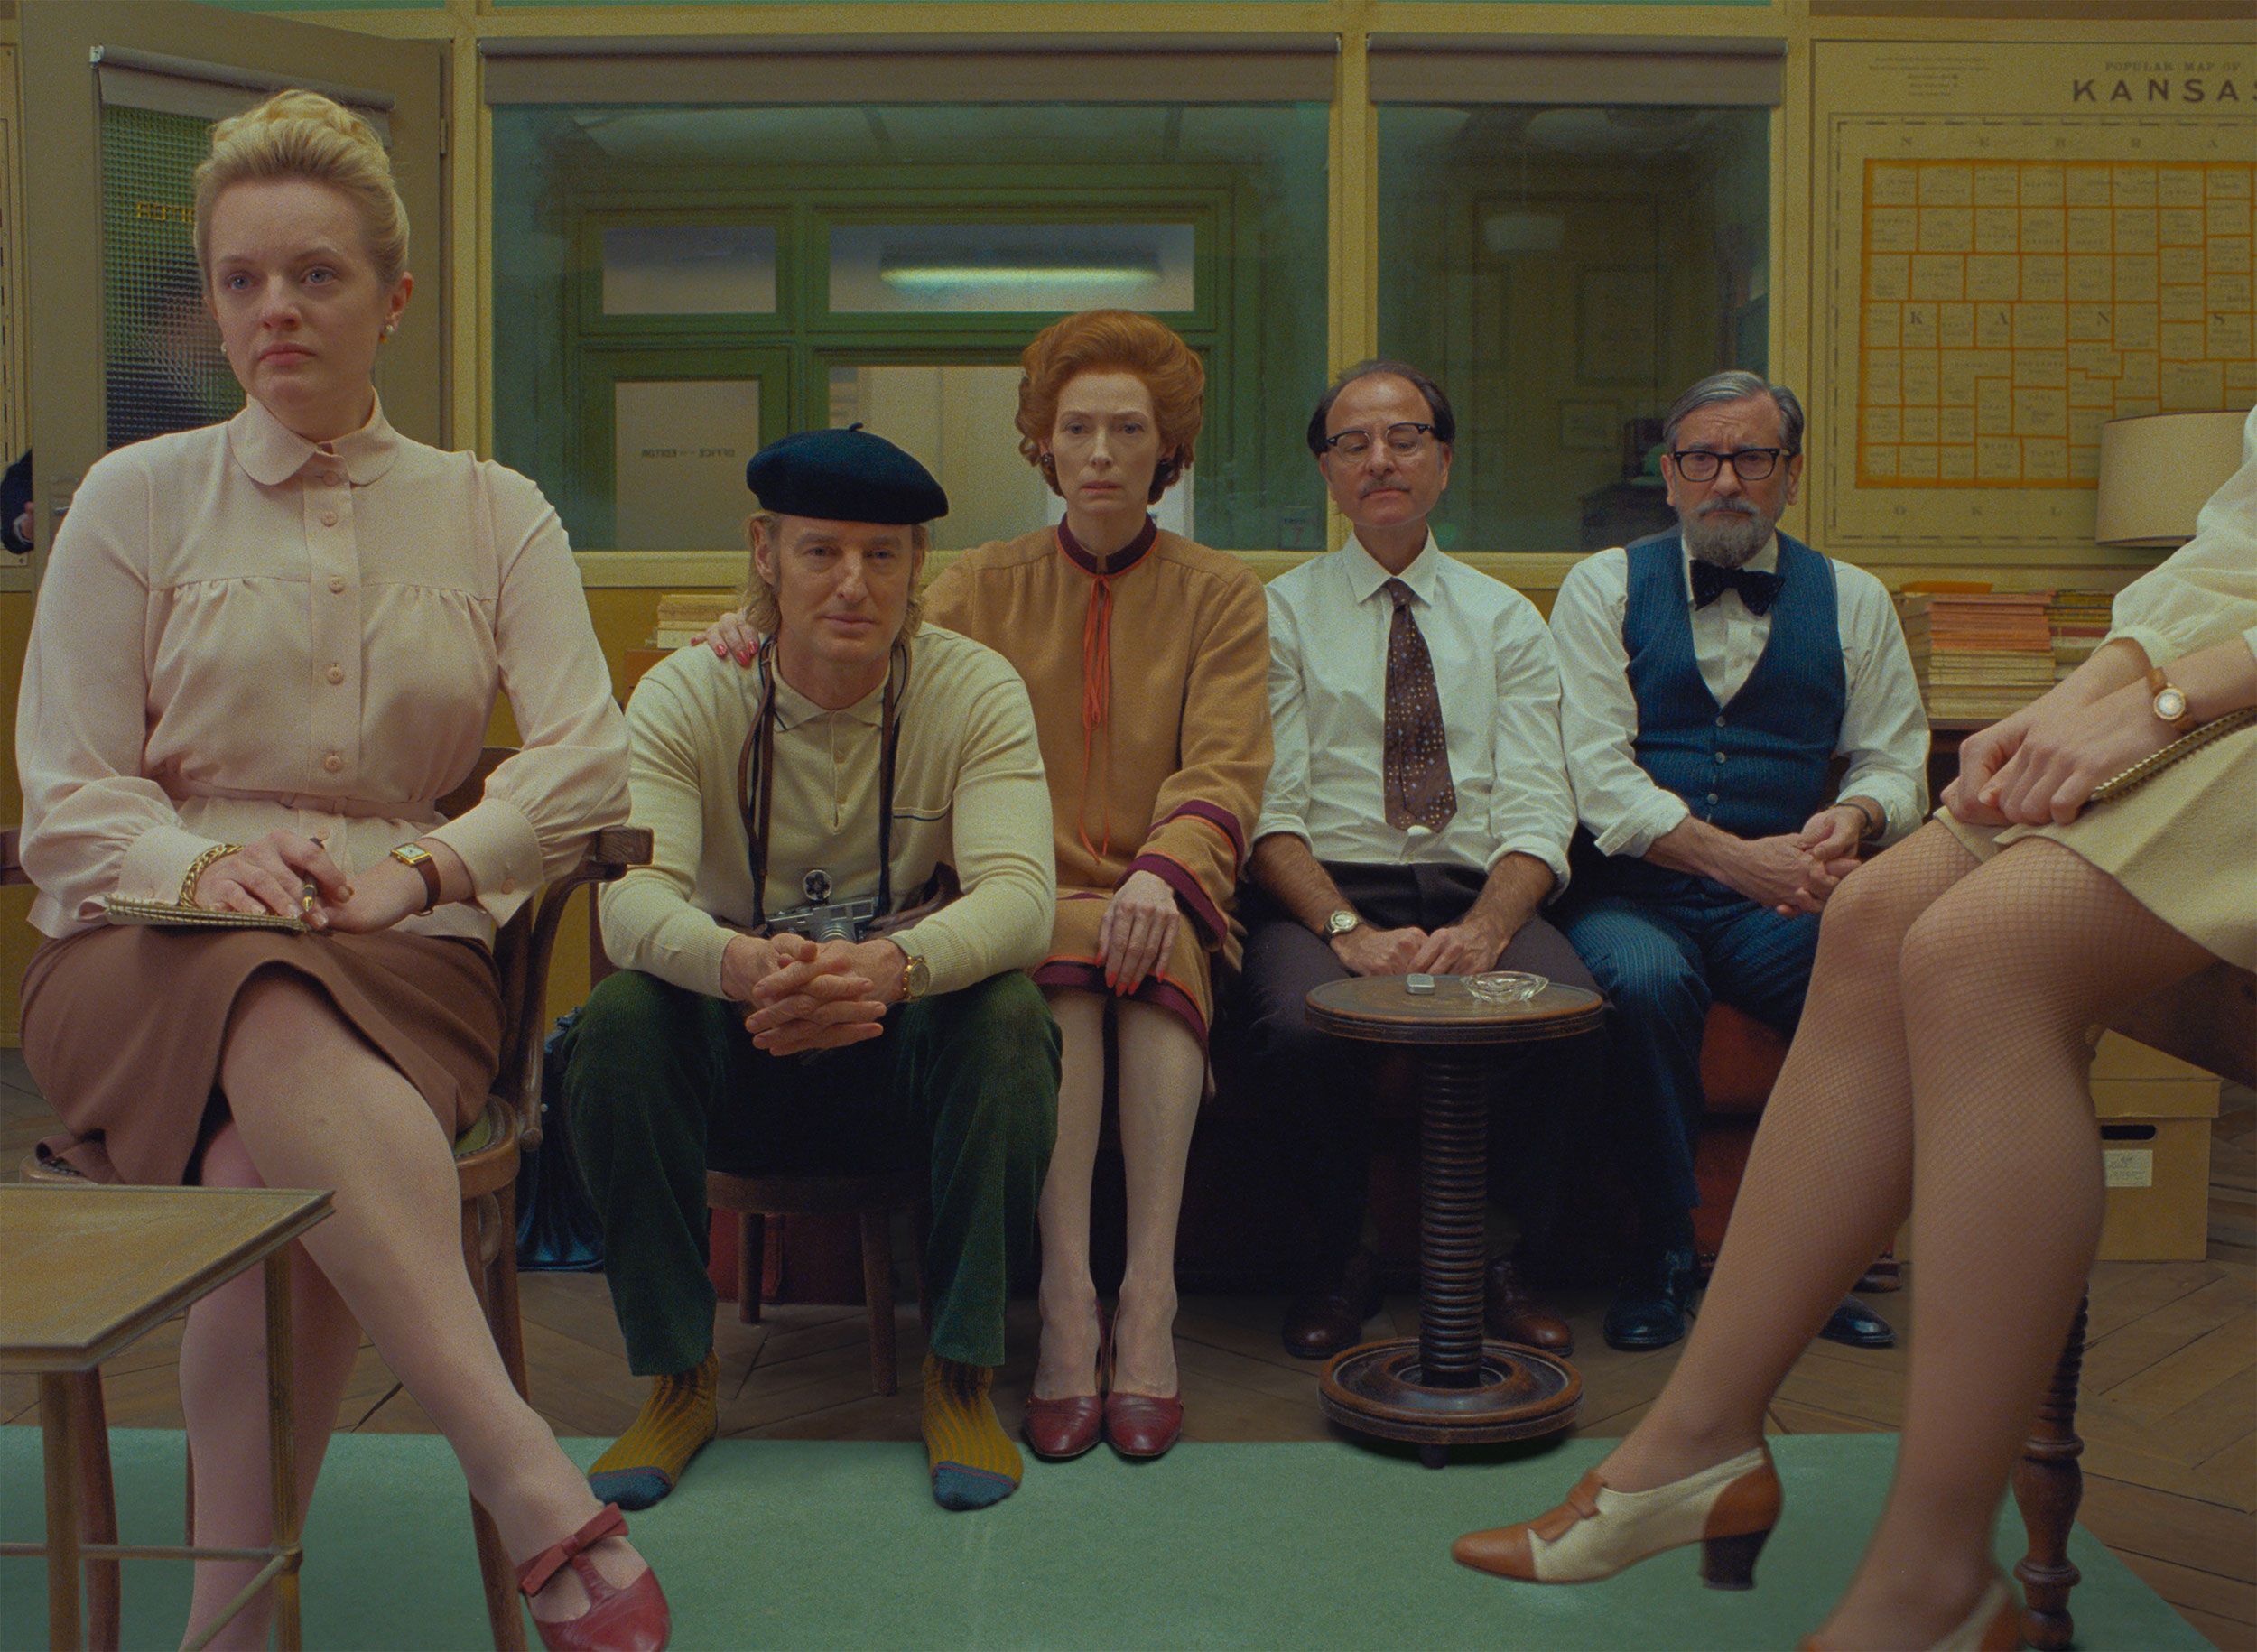 Charming Café Looks Like It's From a Wes Anderson Film